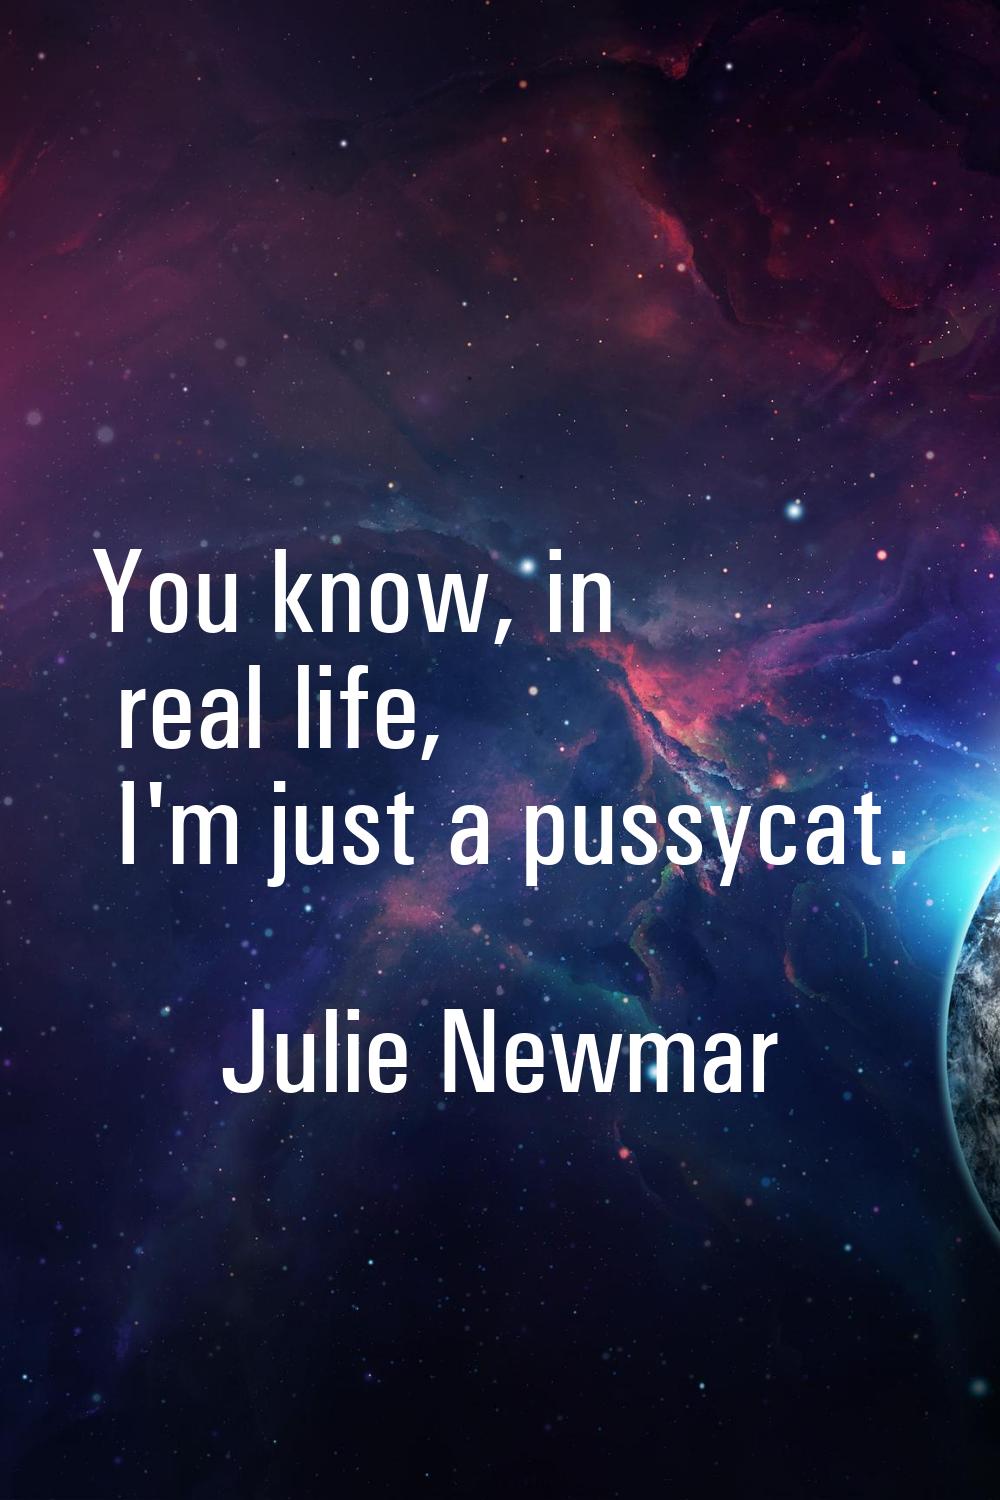 You know, in real life, I'm just a pussycat.